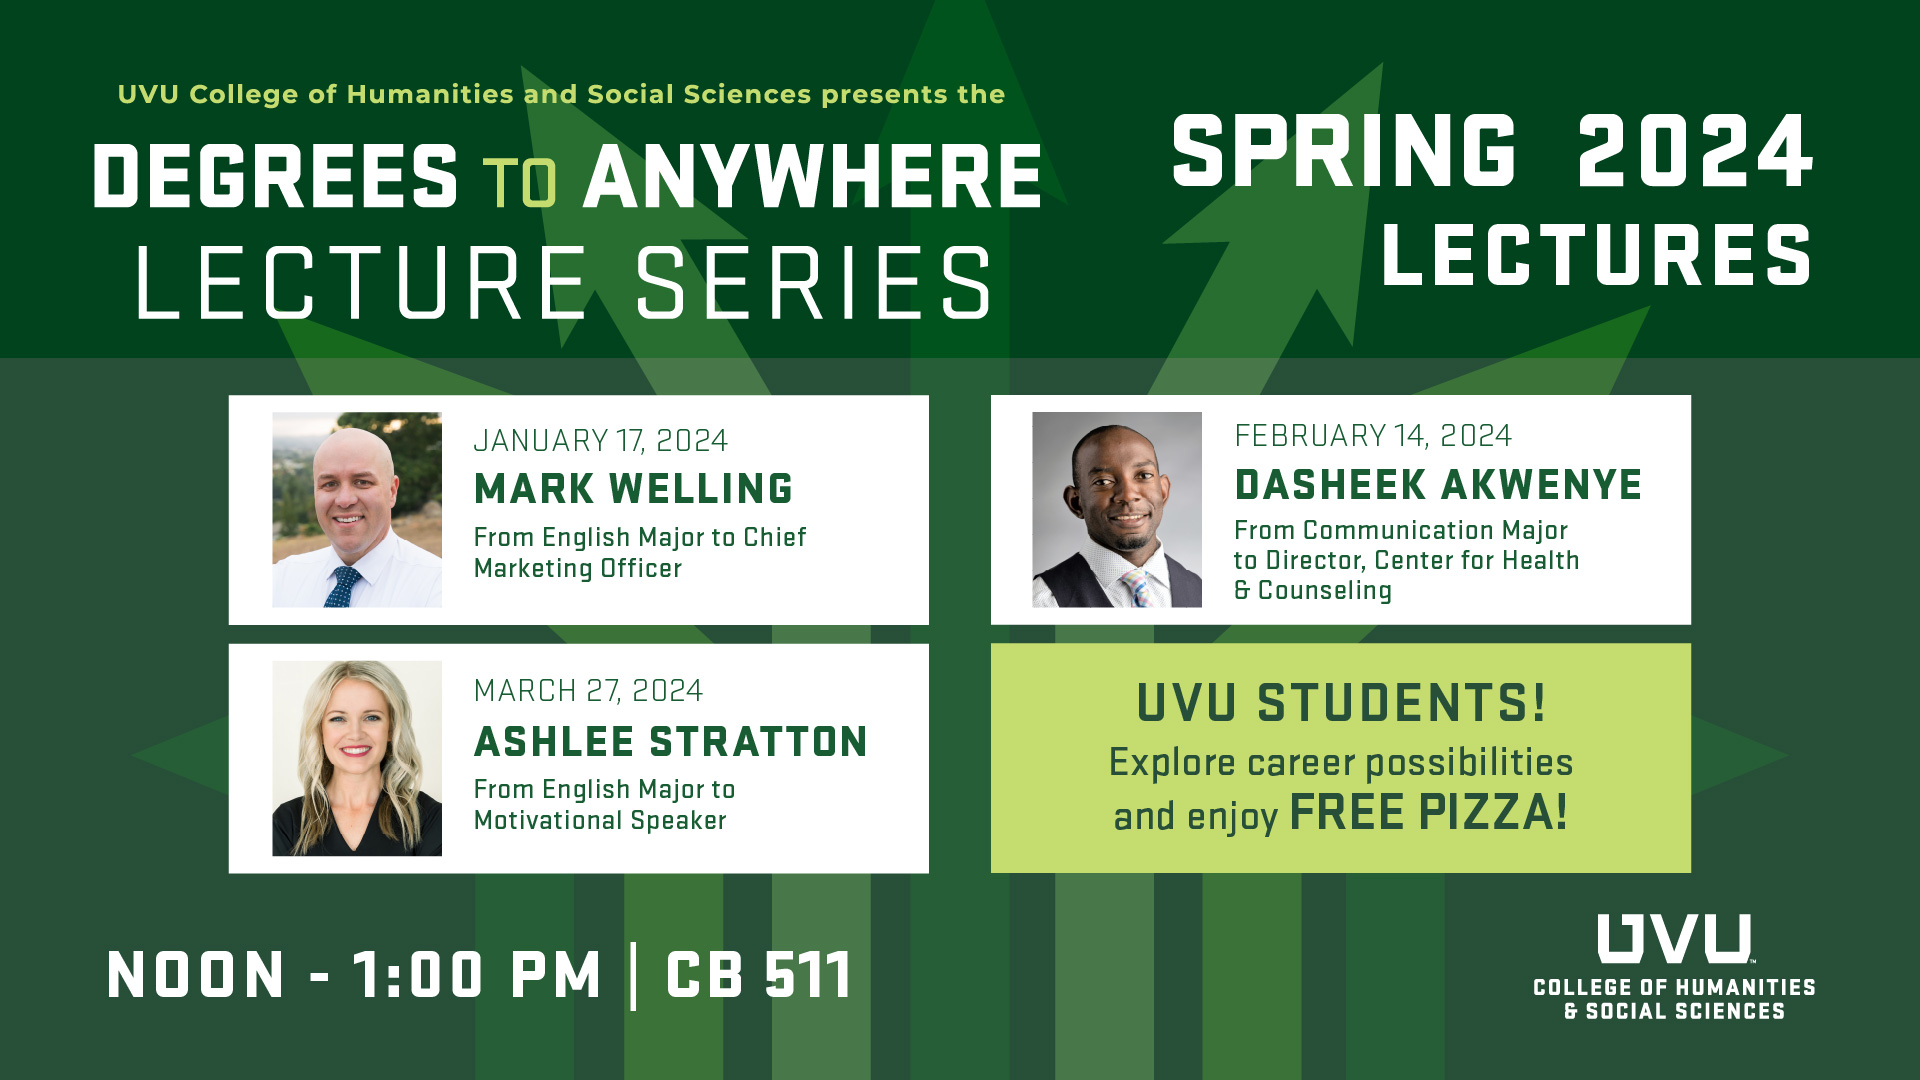 Upcoming Spring 2024 speakers presenting at noon to 1pm in CB510/511: Mark Welling on January 17th, DaSheek Akwenye on February 14th, and Ashlee Stratton on March 27th